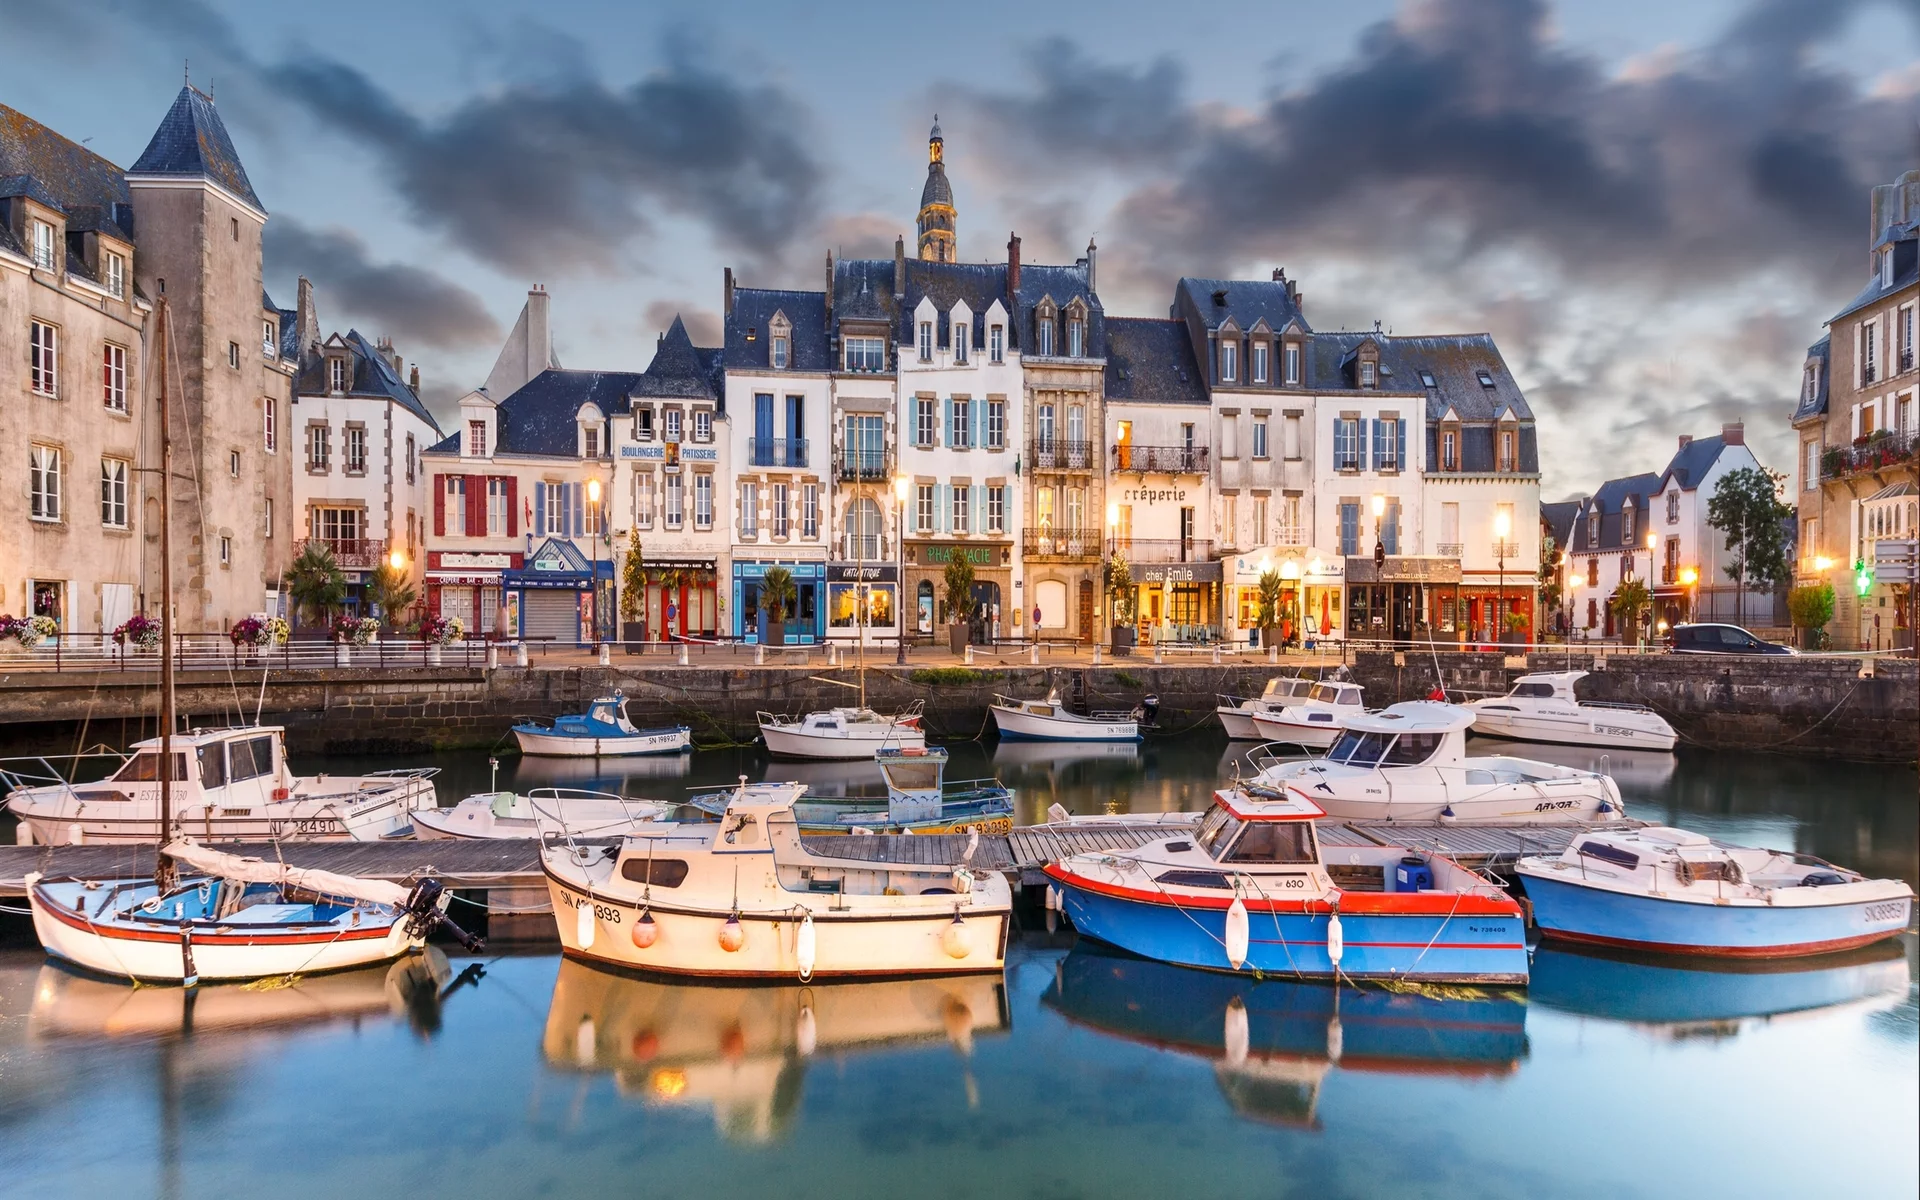 Buying real estate in&nbsp;France